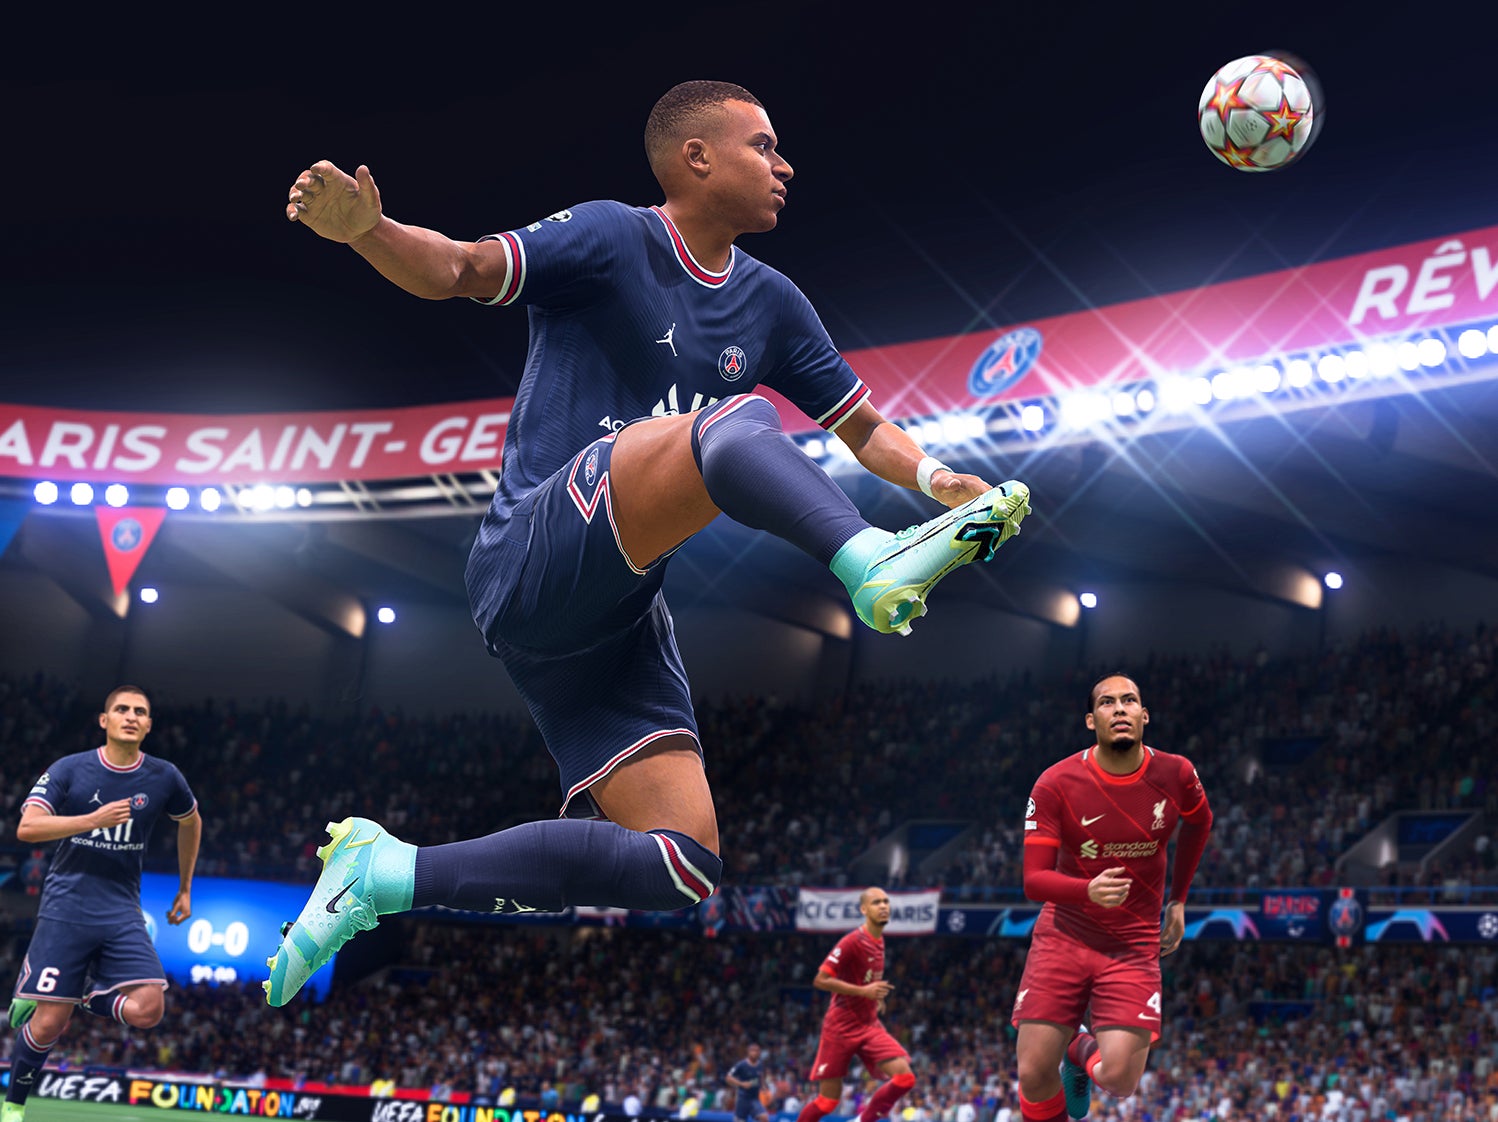 Kylian Mbappe could have been a OTW if he moved clubs this summer